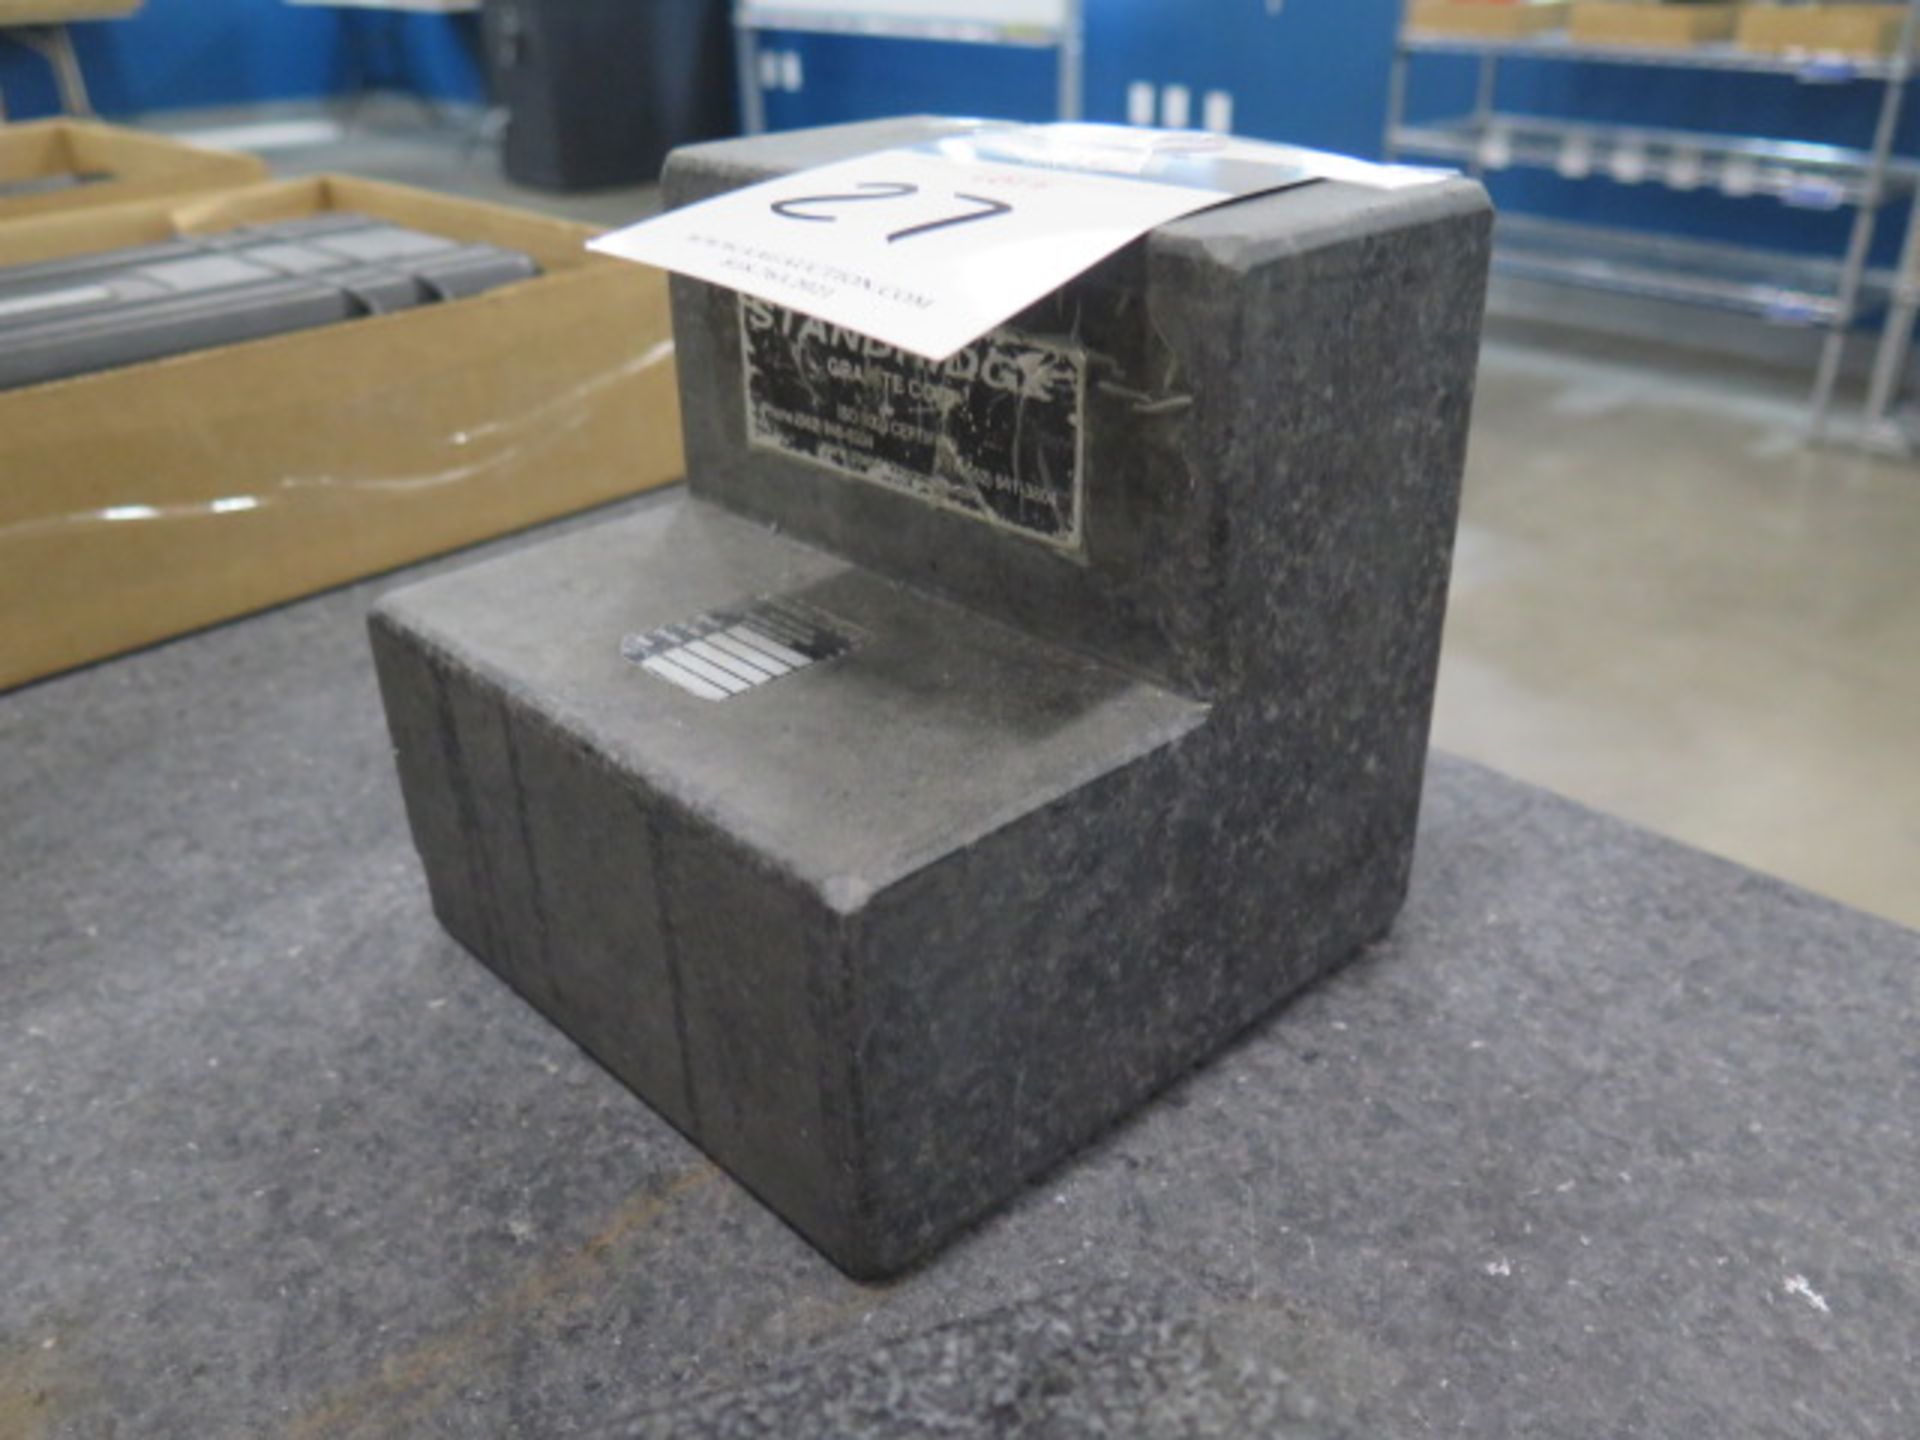 Standridge 6" x 6" x 6" Granite Angle Plate (SOLD AS-IS - NO WARRANTY) - Image 2 of 4